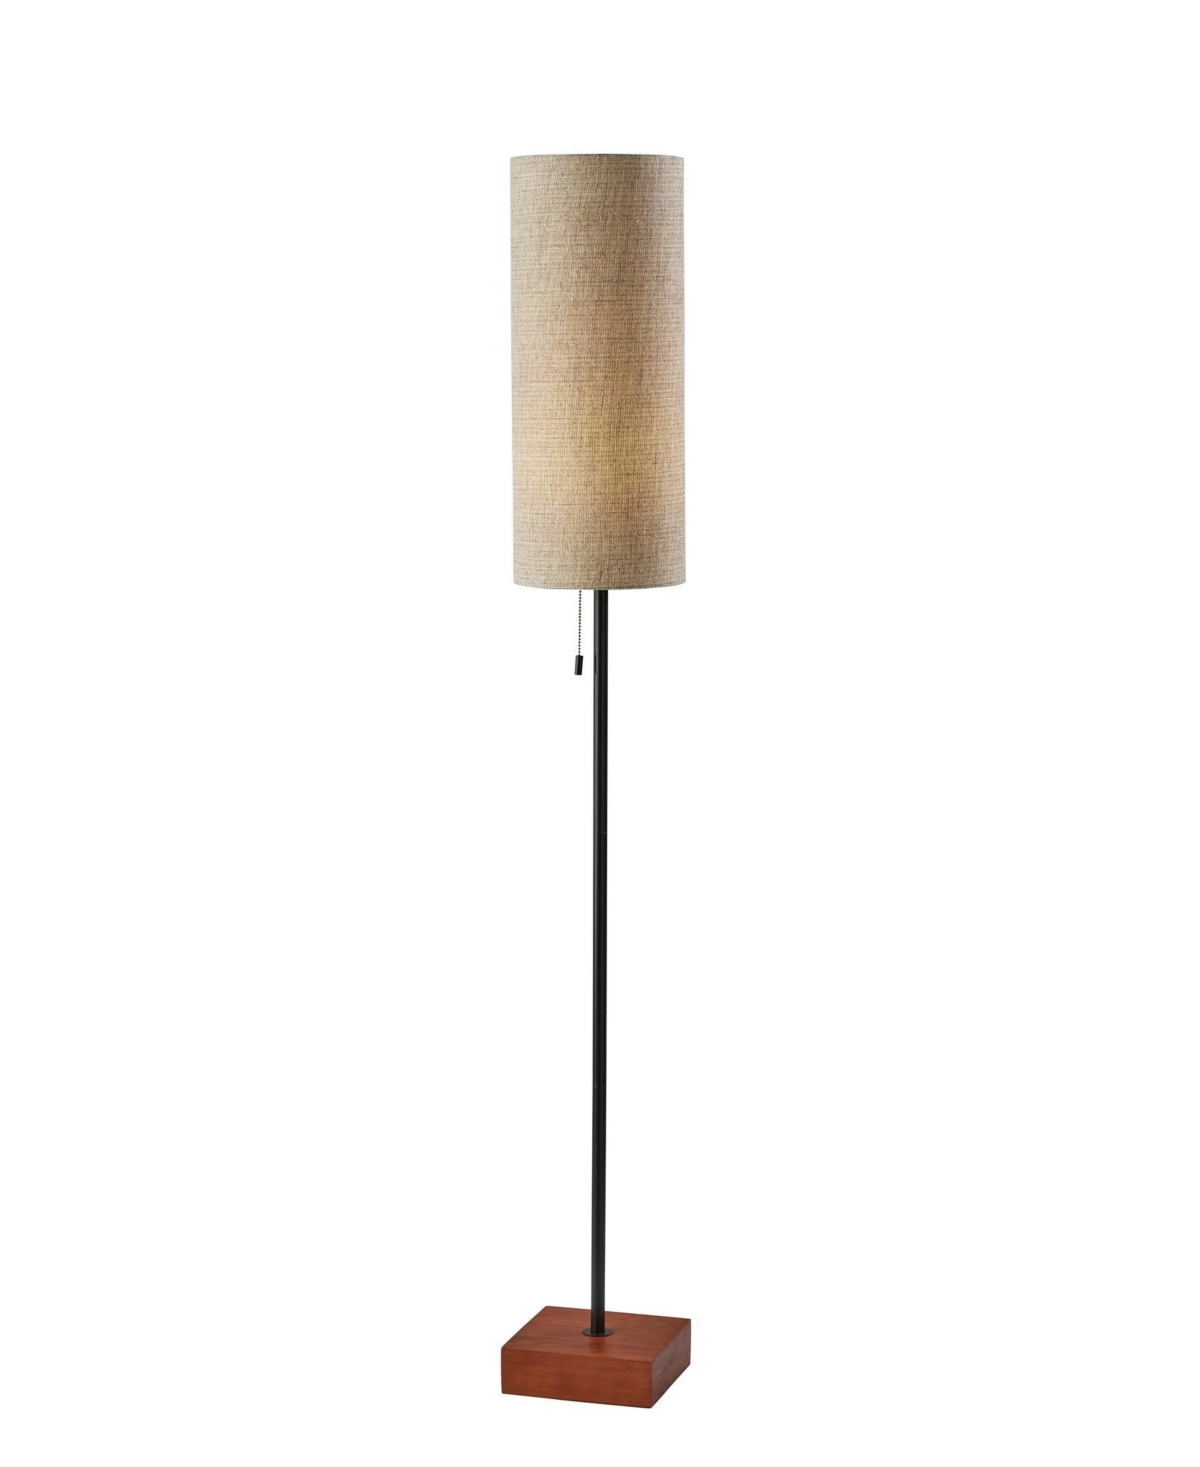 Adesso Trudy Floor Lamp In Natural